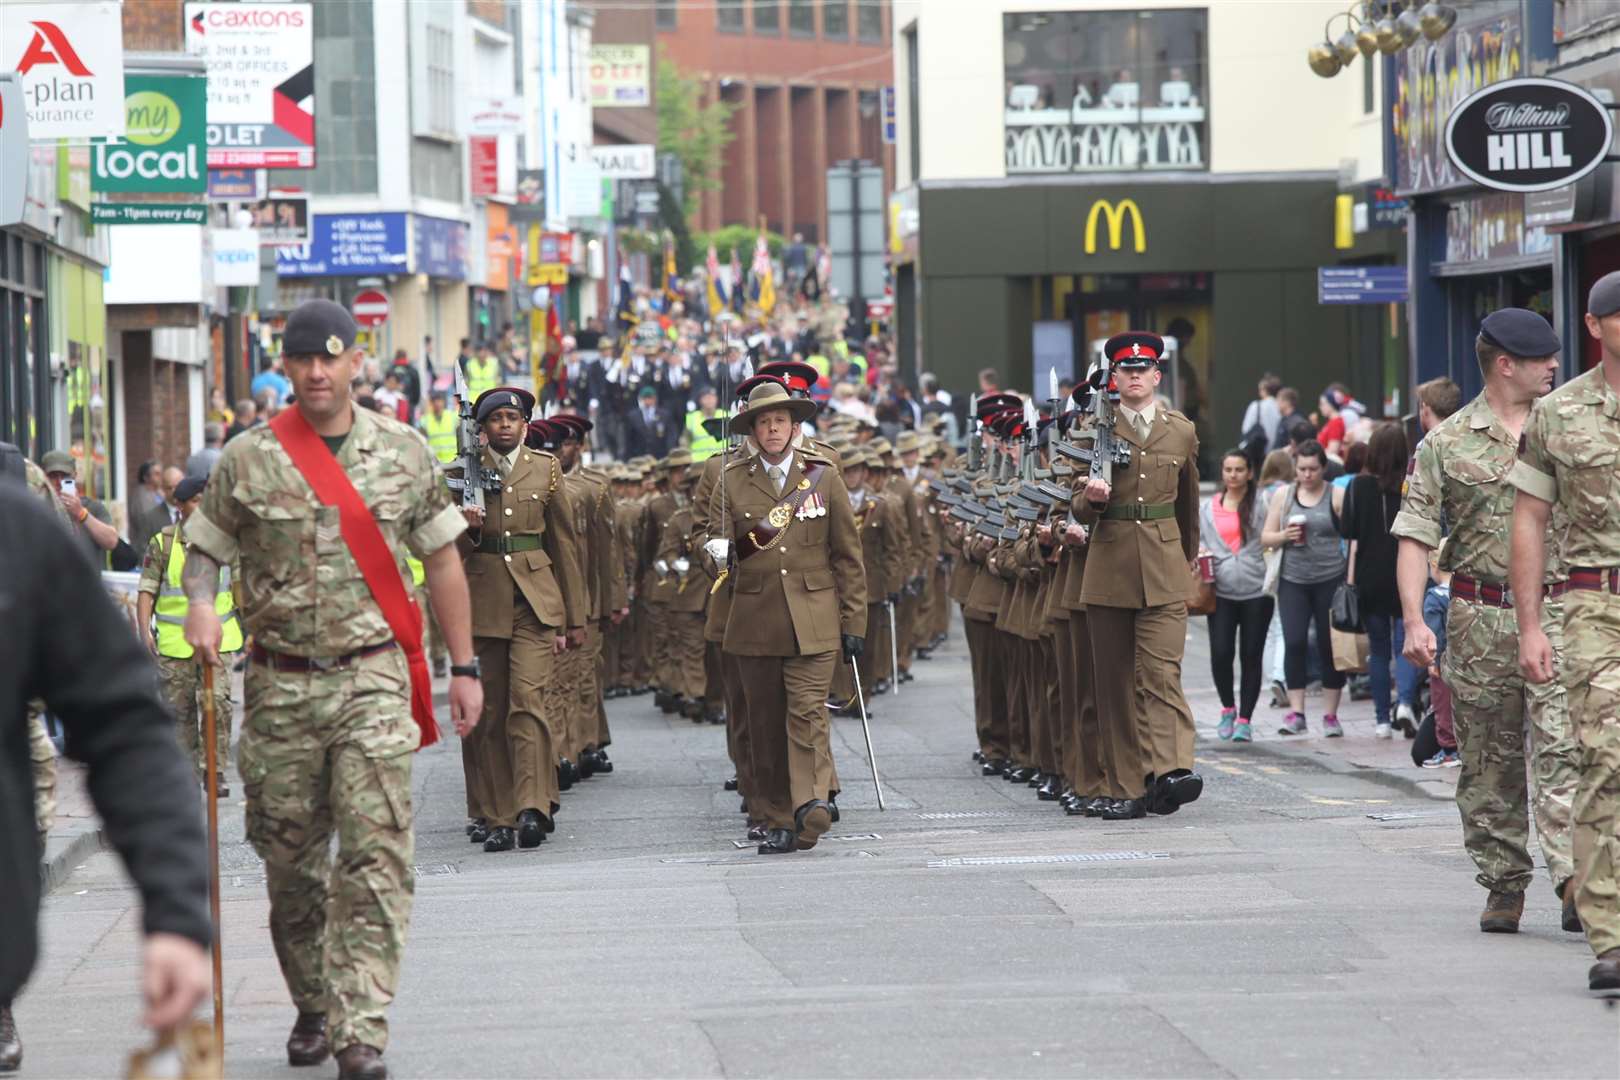 The 36 Engineer Regiment leads last year's civic parade